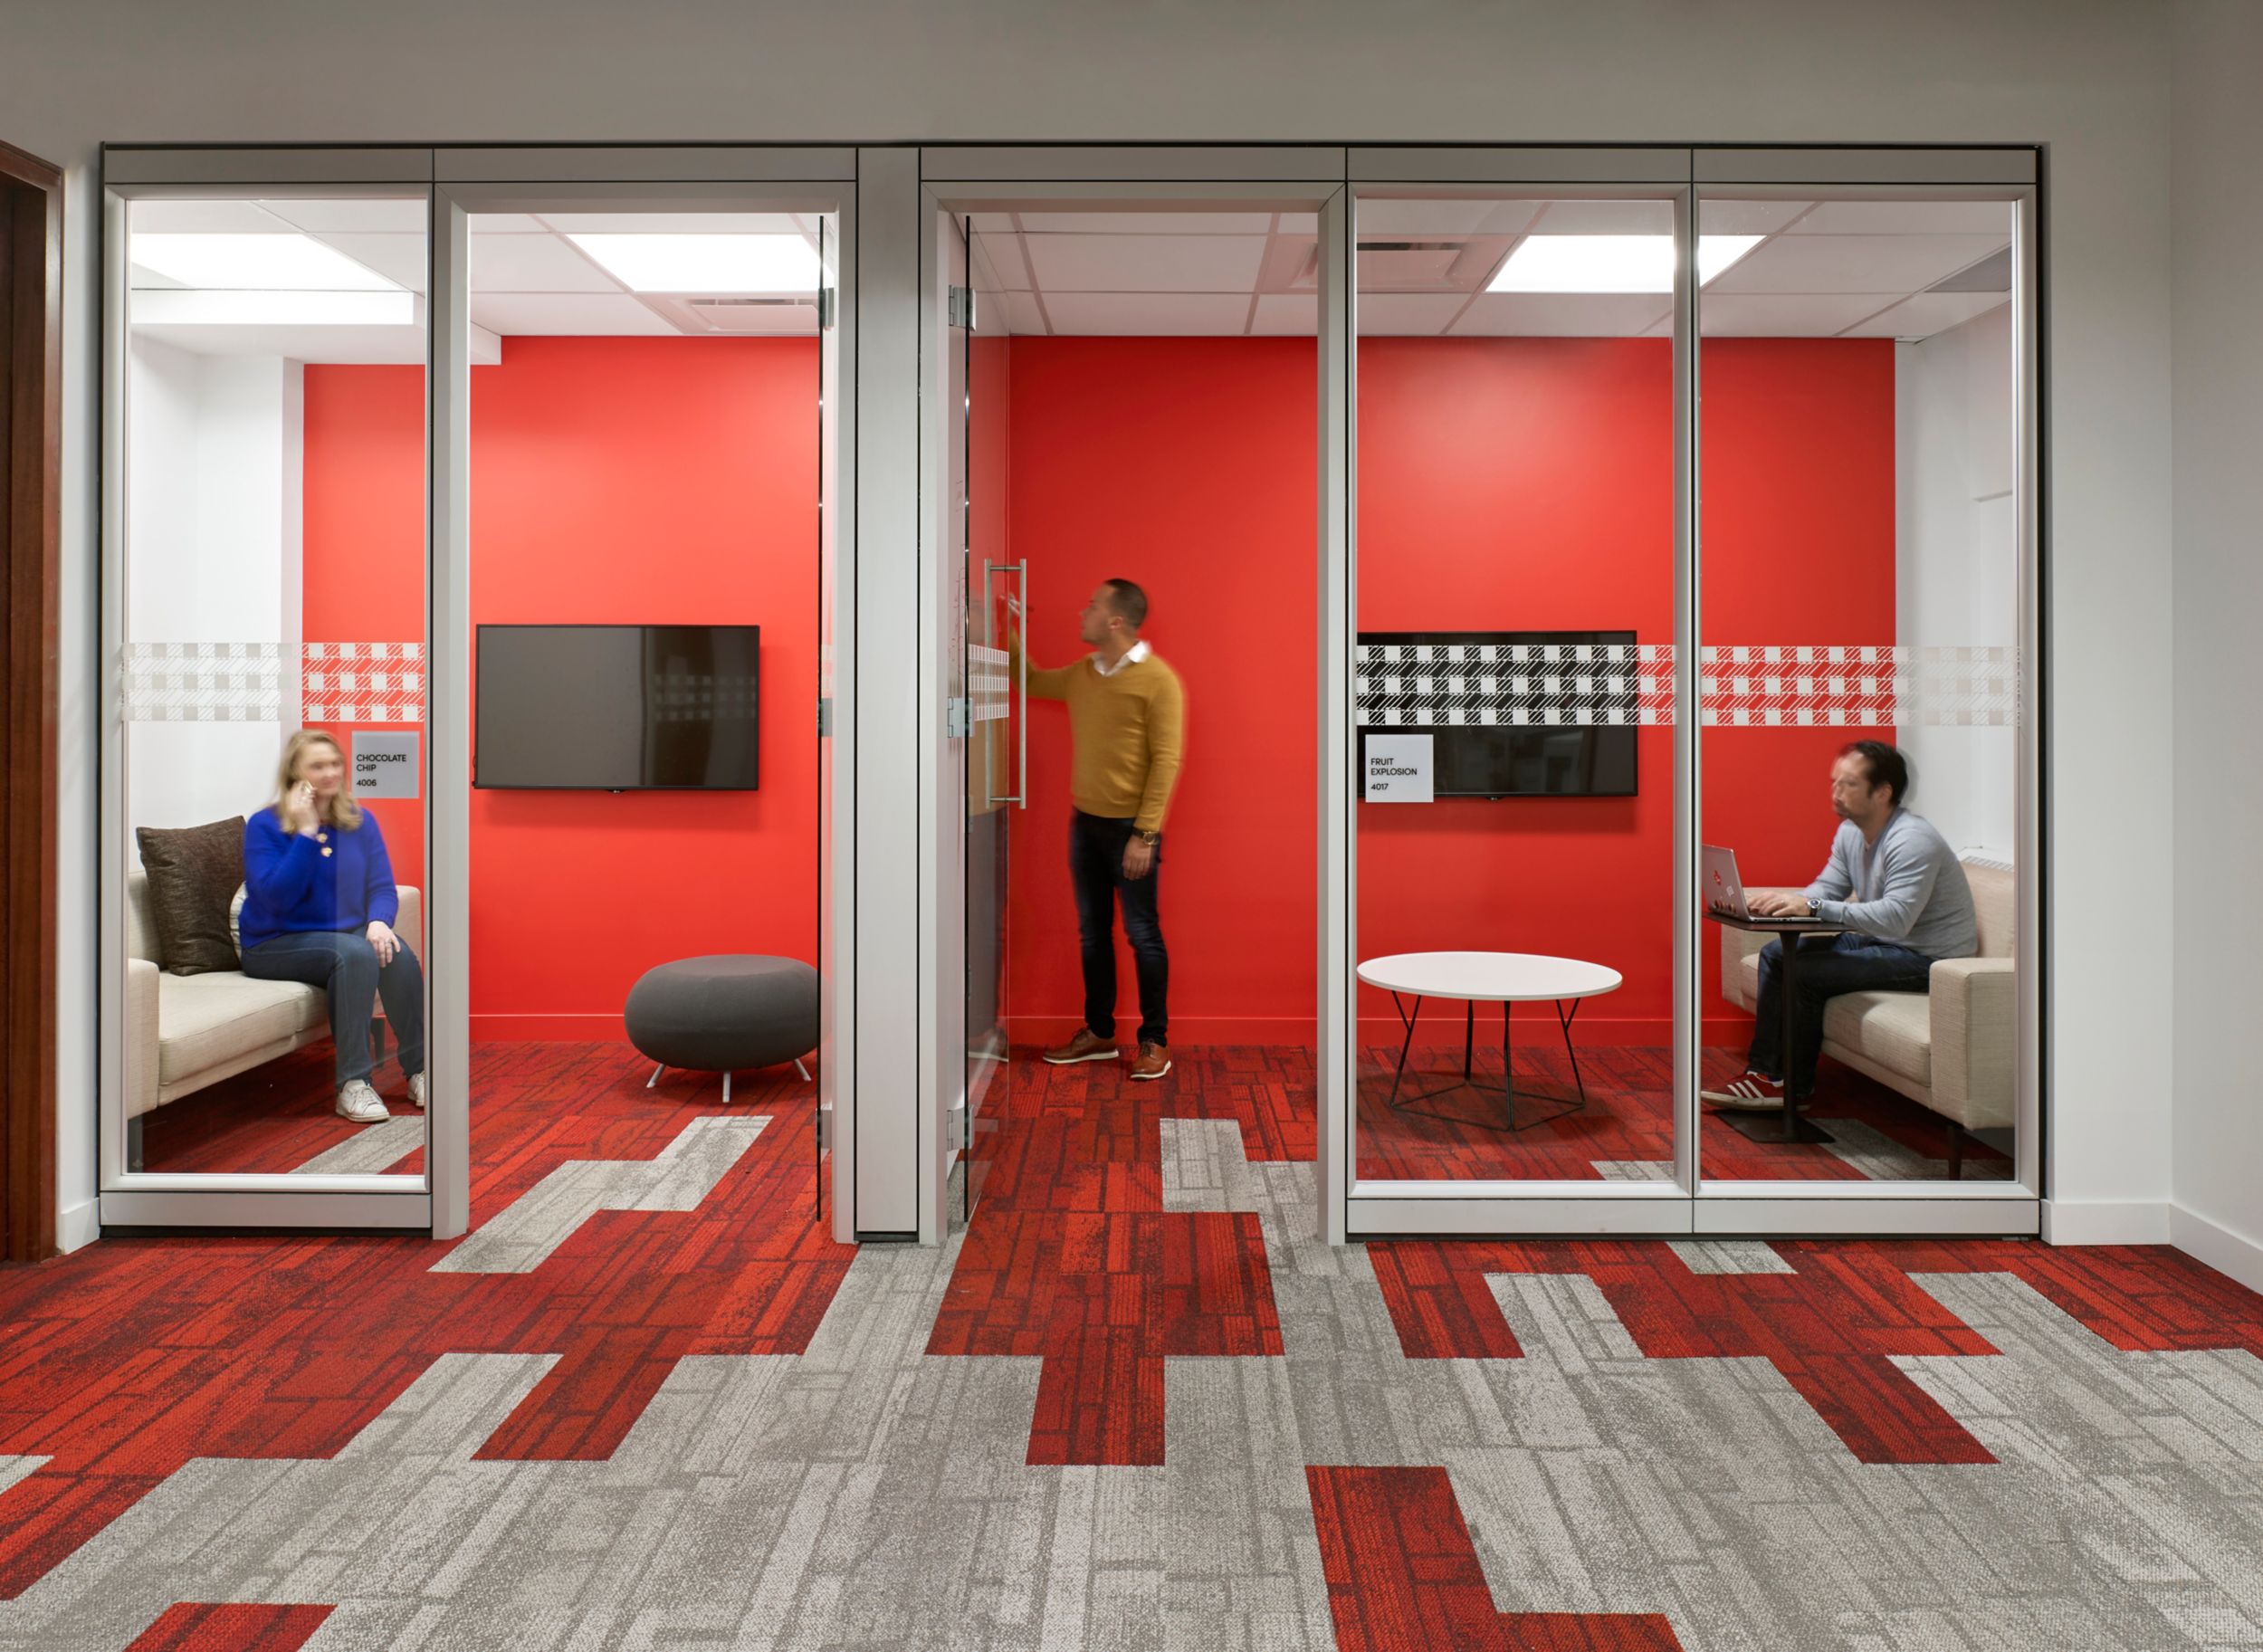 Interface Neighborhood Blocks plank carpet tile in office corridor and small meeting rooms with people working image number 7